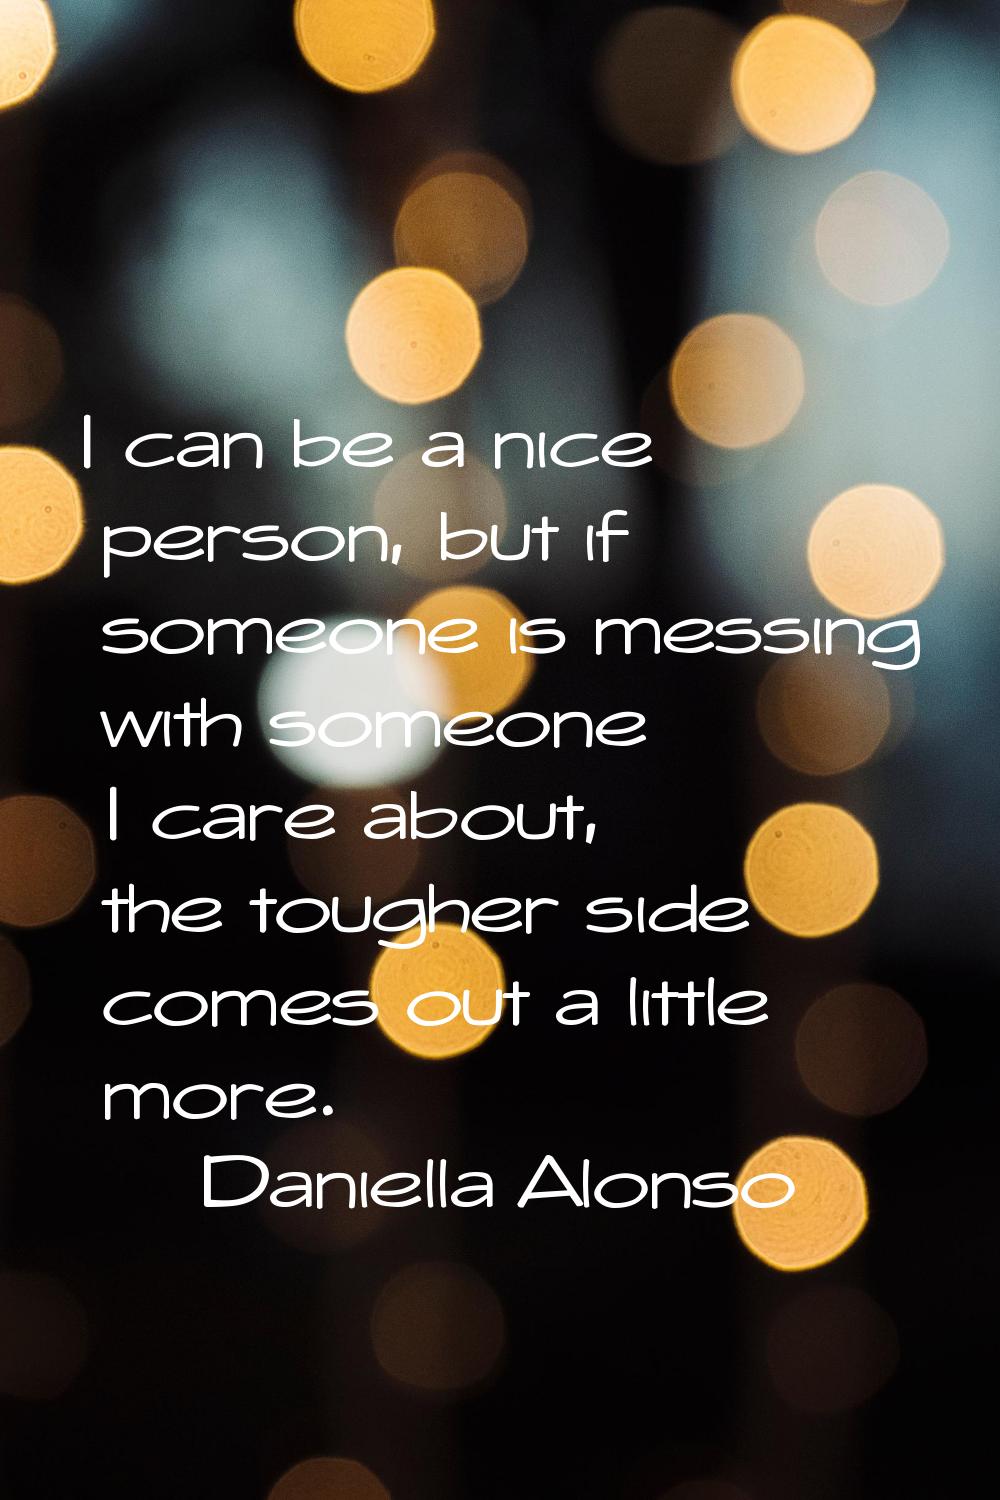 I can be a nice person, but if someone is messing with someone I care about, the tougher side comes